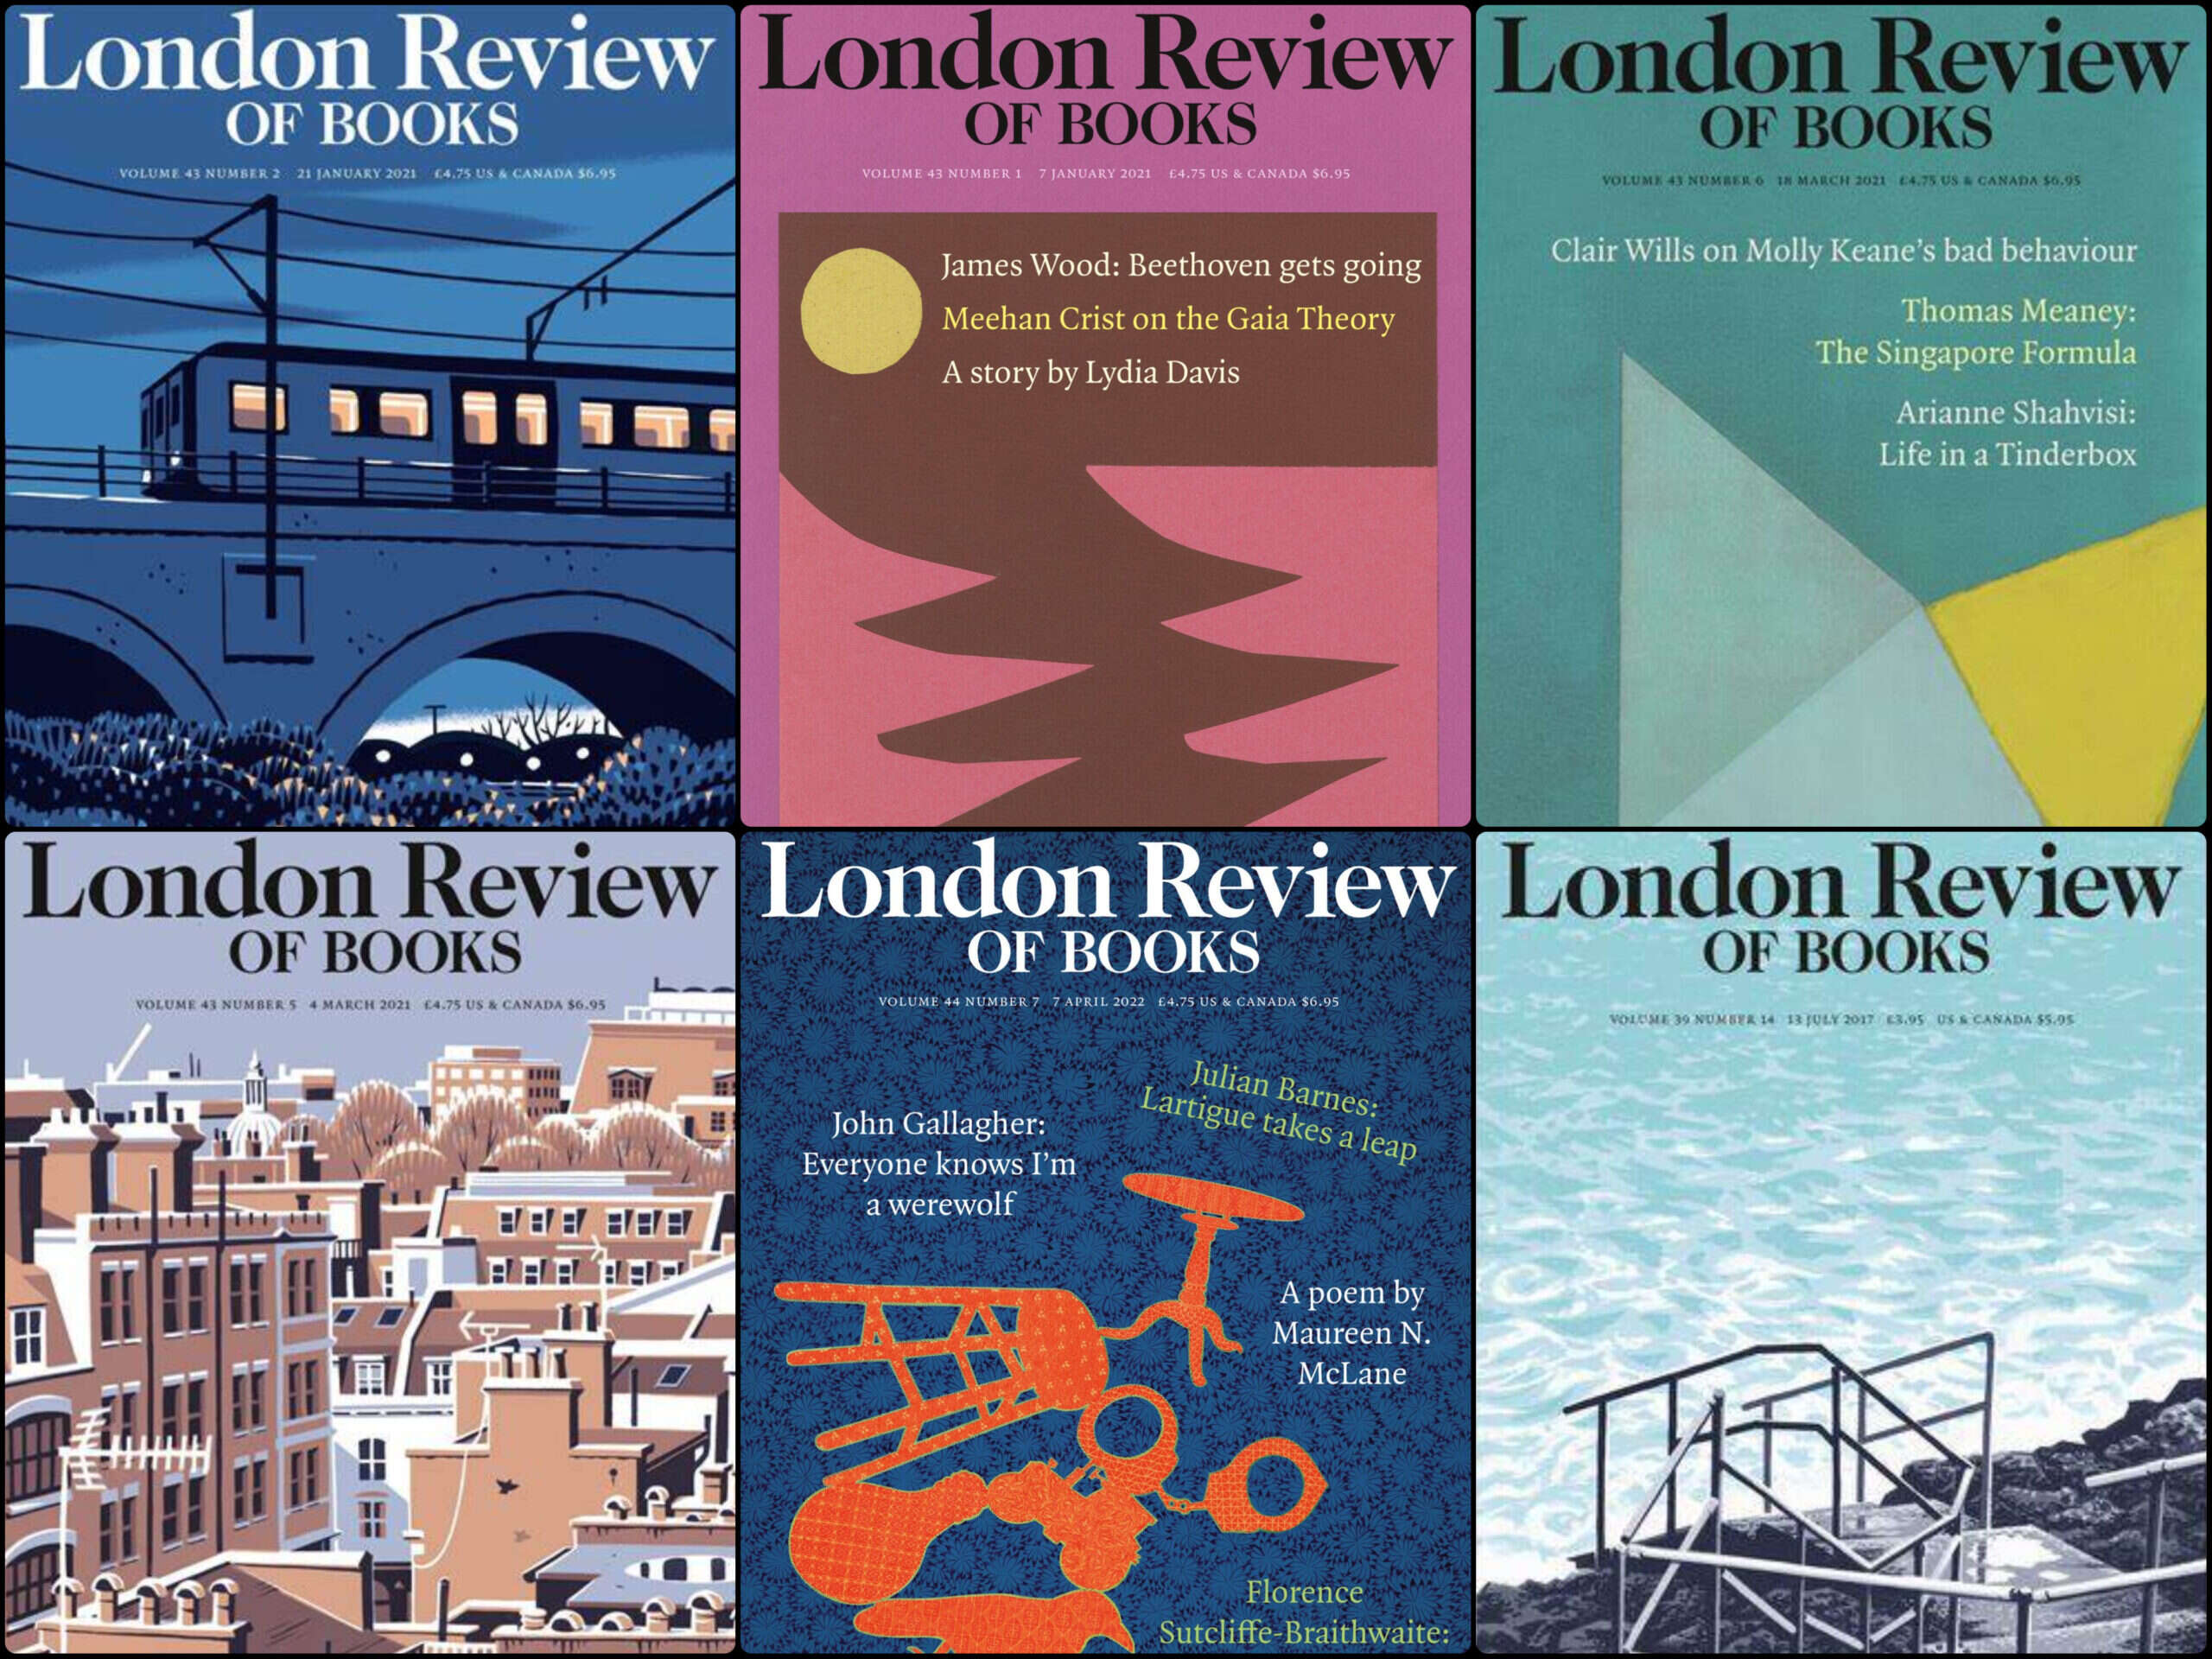 London Review of Books|